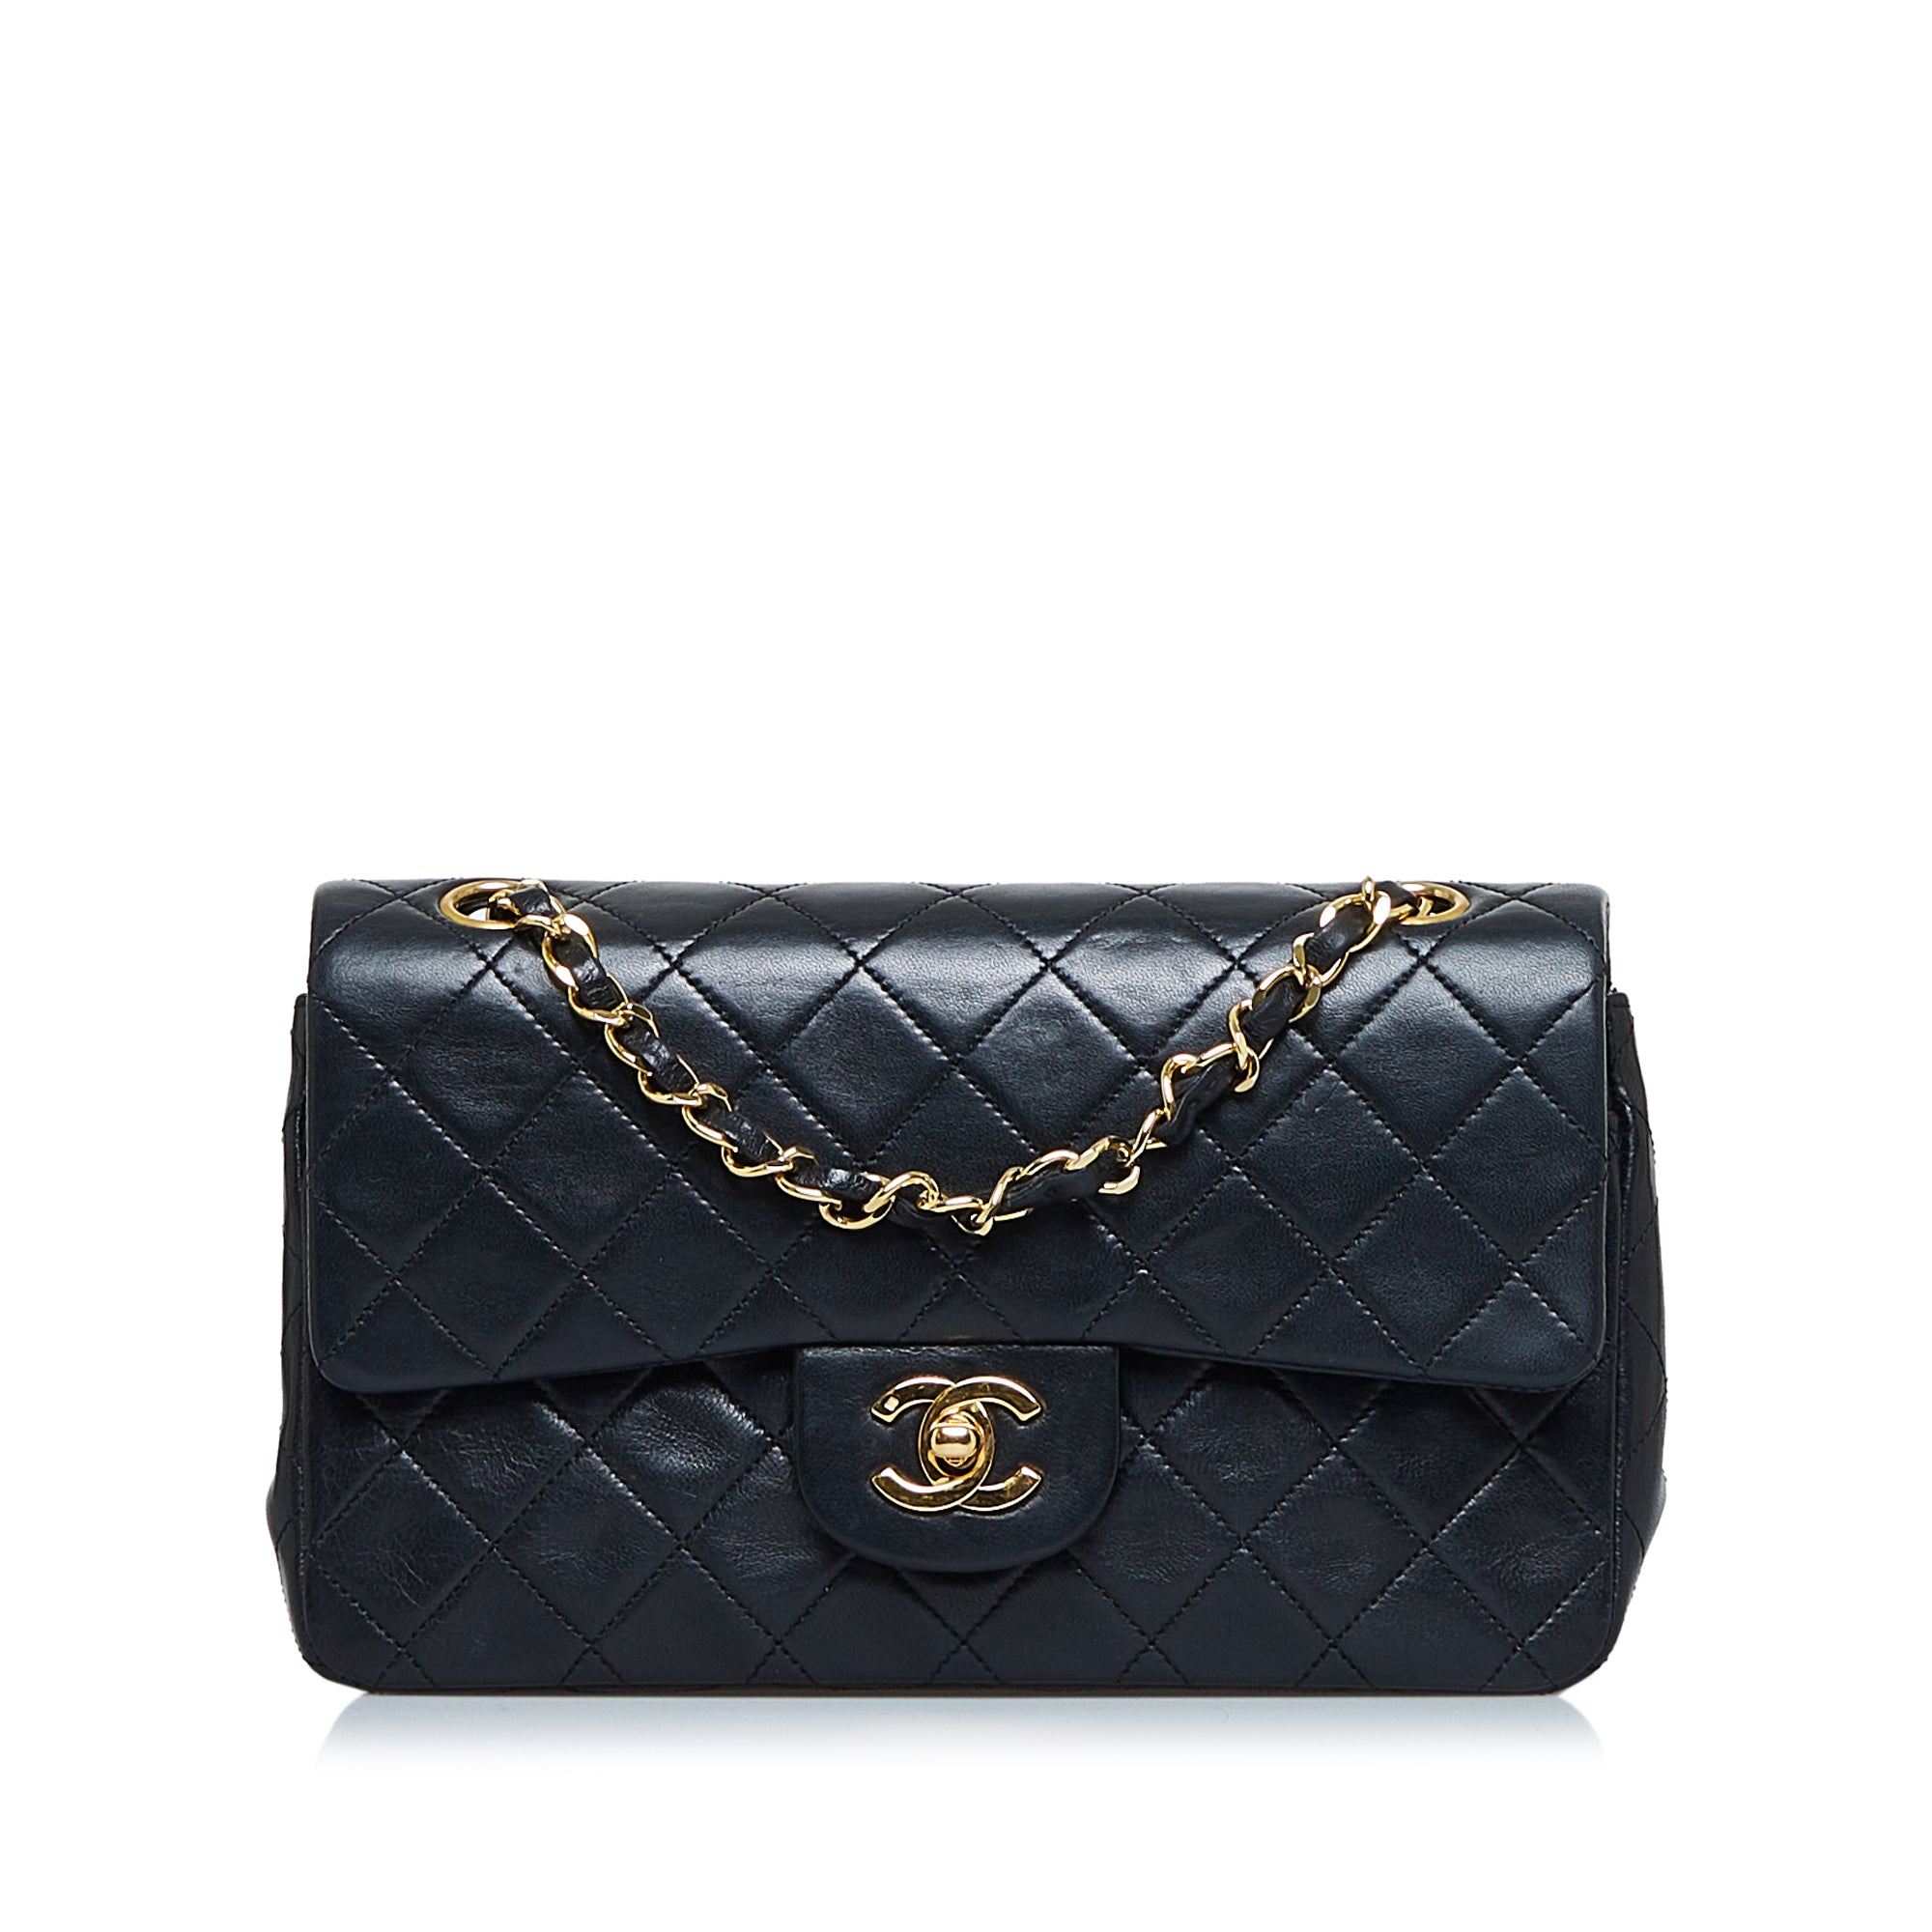 CHANEL Classic Flap Small Leather Shoulder Bag Black